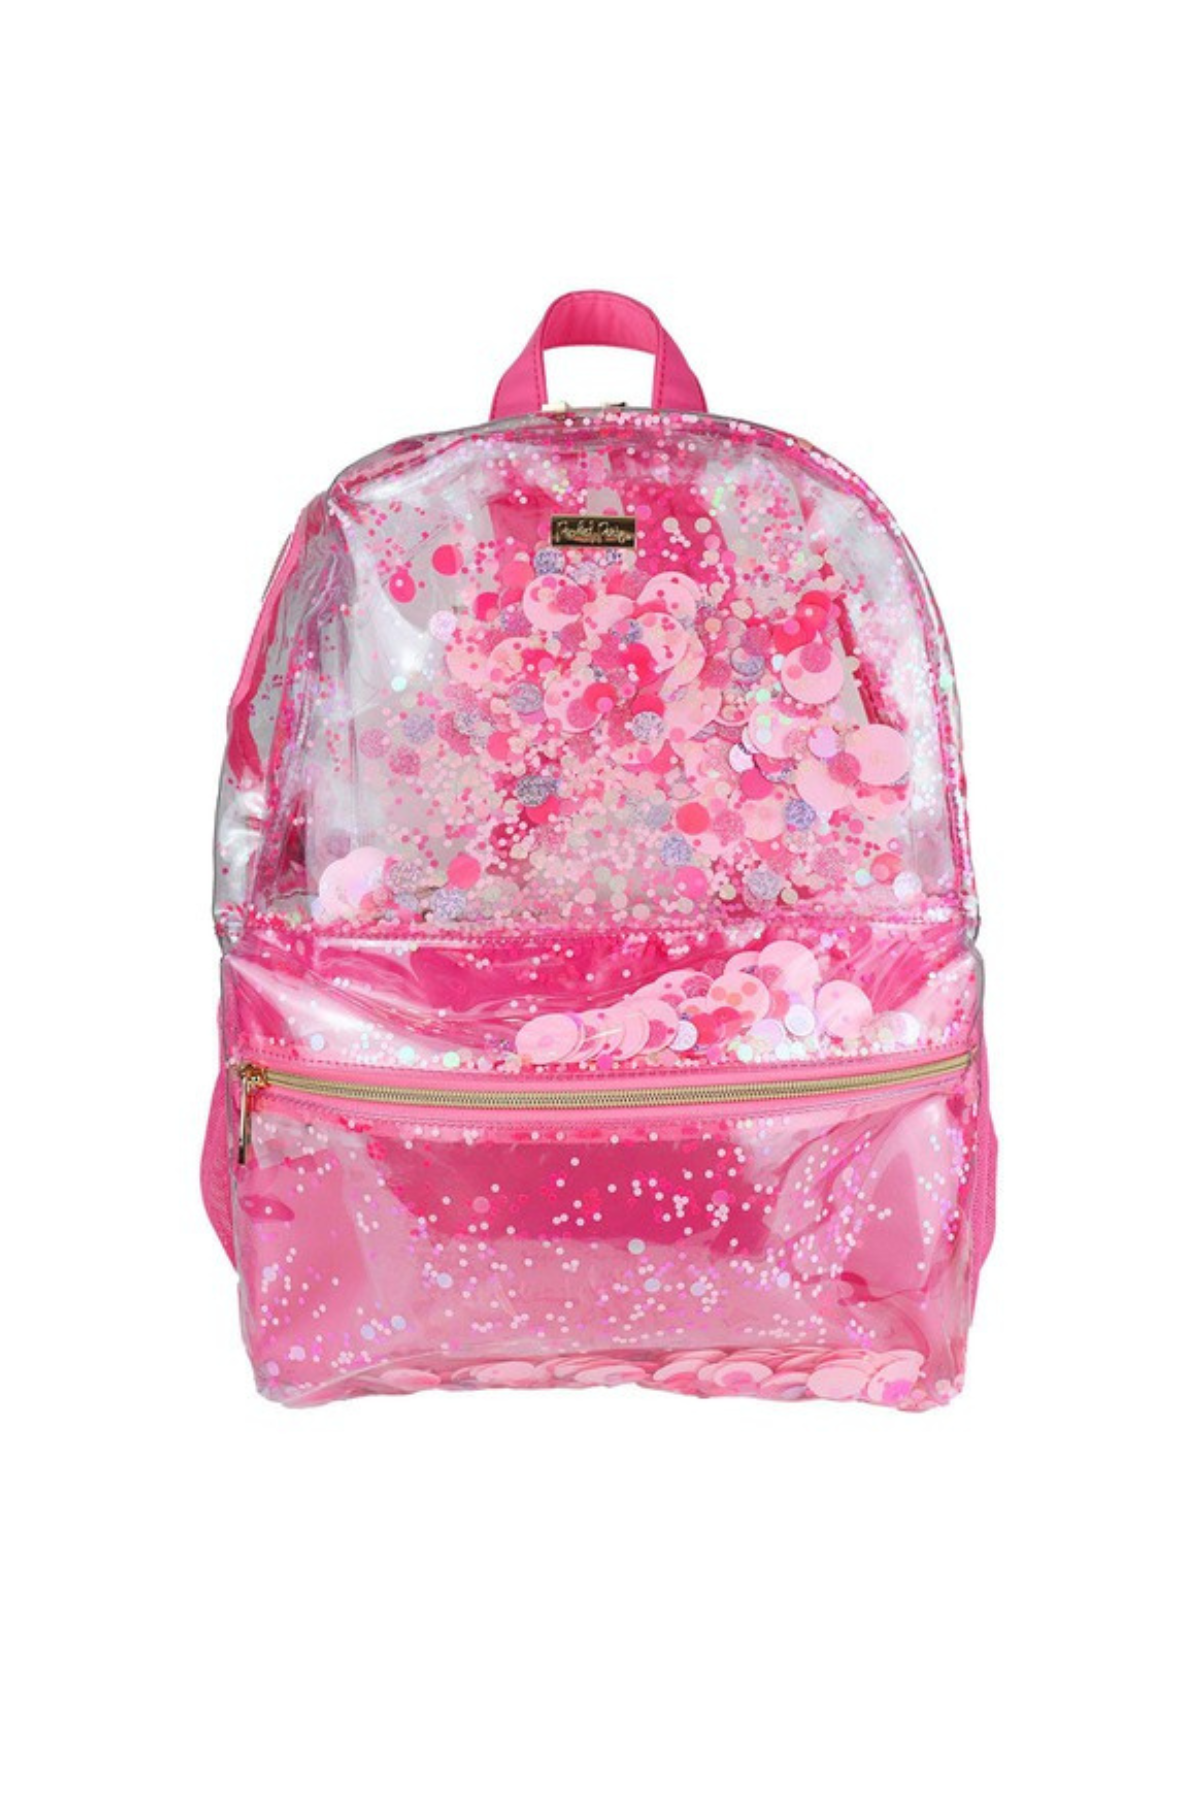 Pink Party Large Confetti Backpack